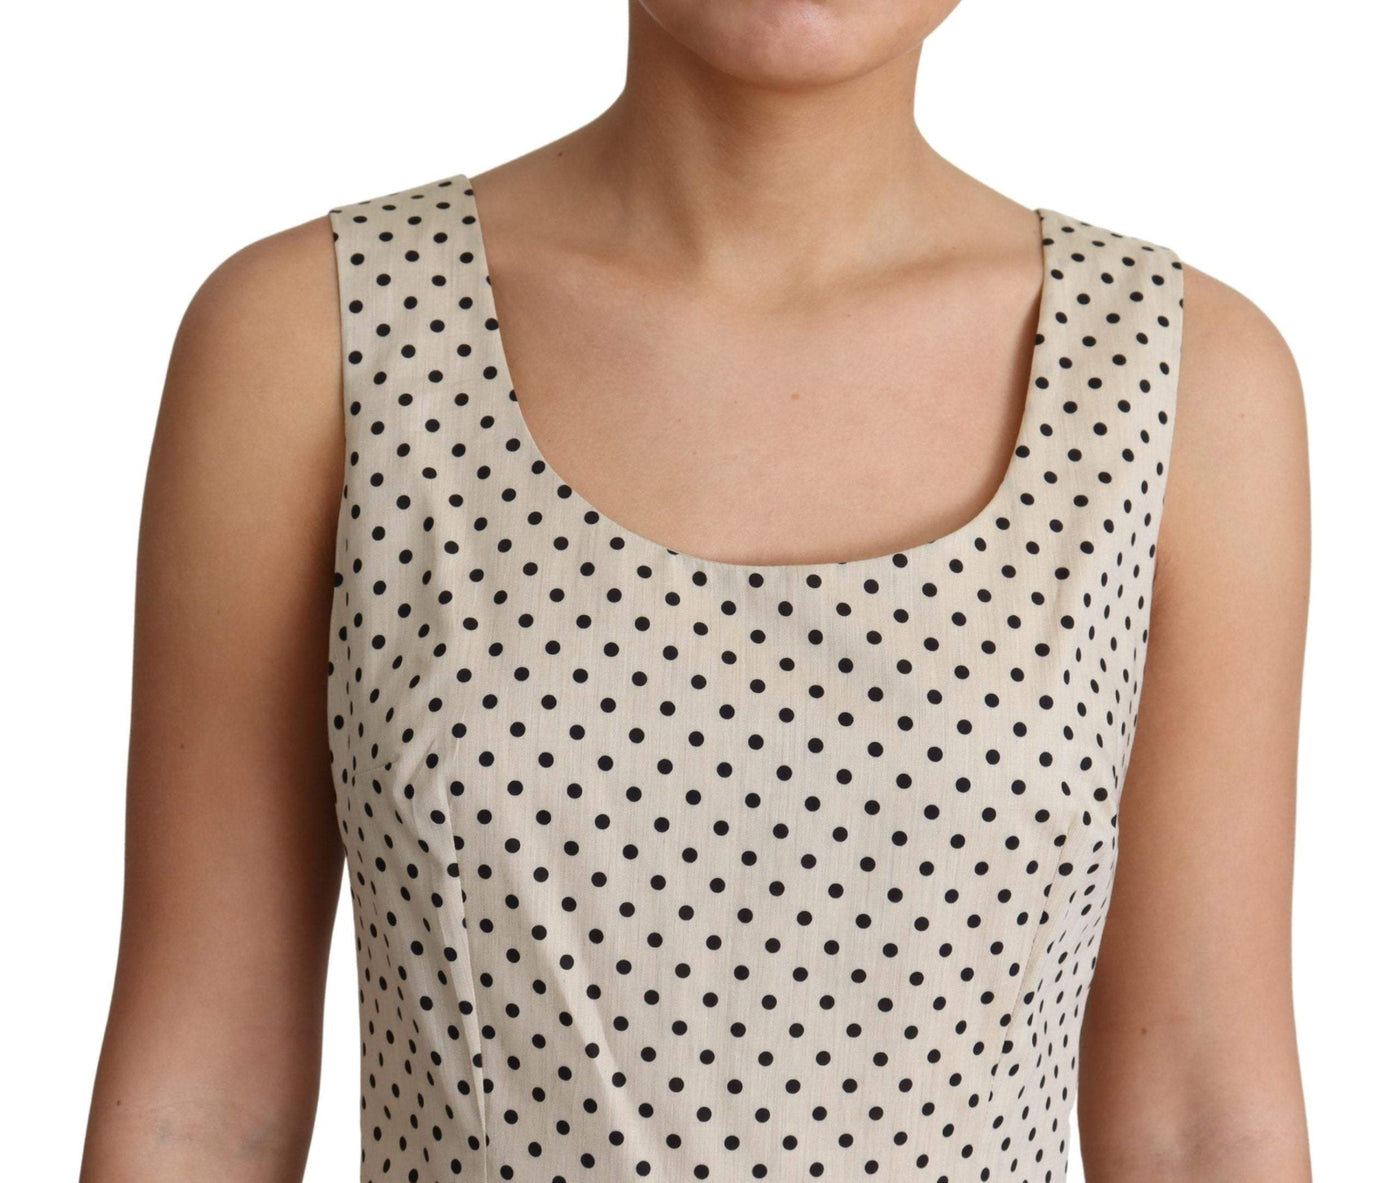 Dolce & Gabbana Beige Polka Dotted Cotton A-Line Dress #women, Beige, Dolce & Gabbana, Dresses - Women - Clothing, feed-agegroup-adult, feed-color-Beige, feed-gender-female, IT38|XS, IT40|S, IT42|M, IT44|L, IT46|XL, Women - New Arrivals at SEYMAYKA